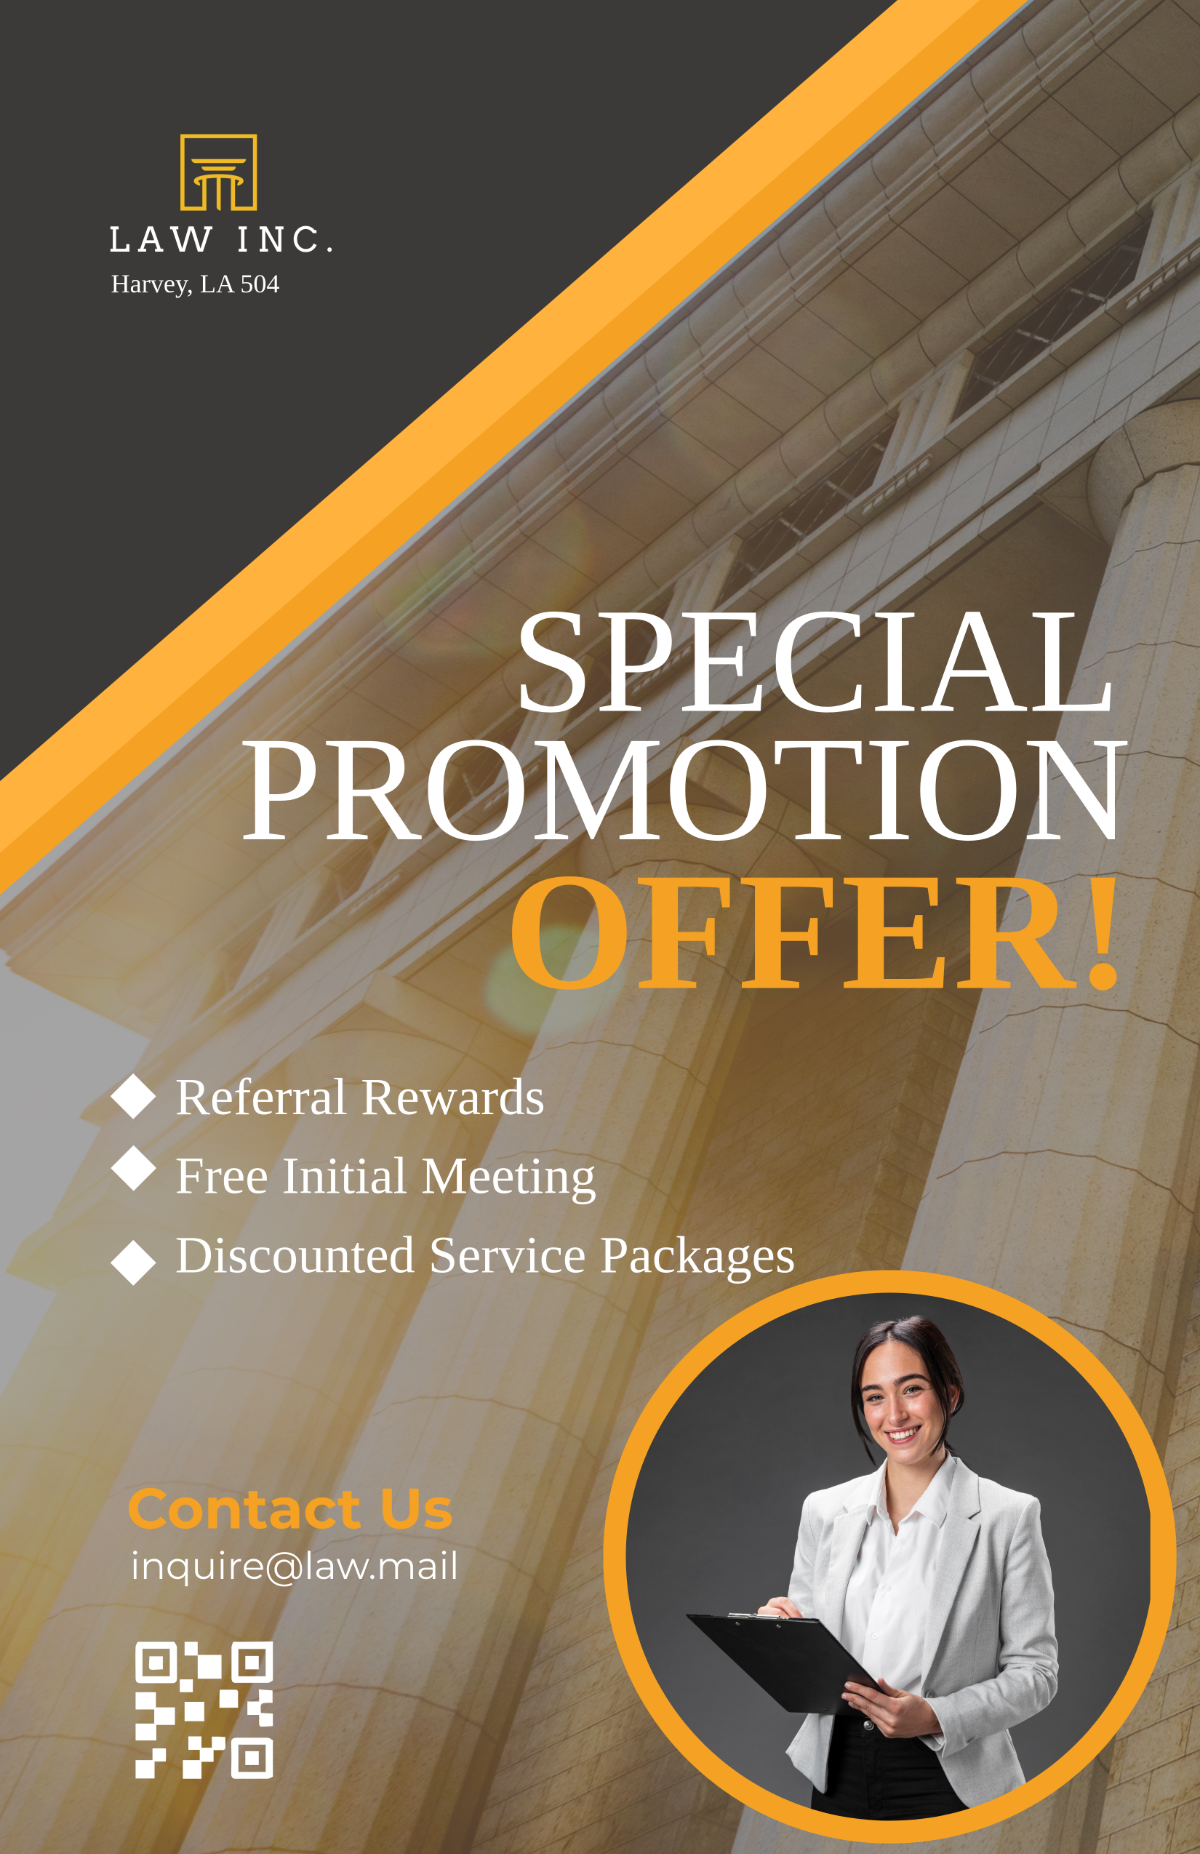 Law Firm Promotion Poster Template